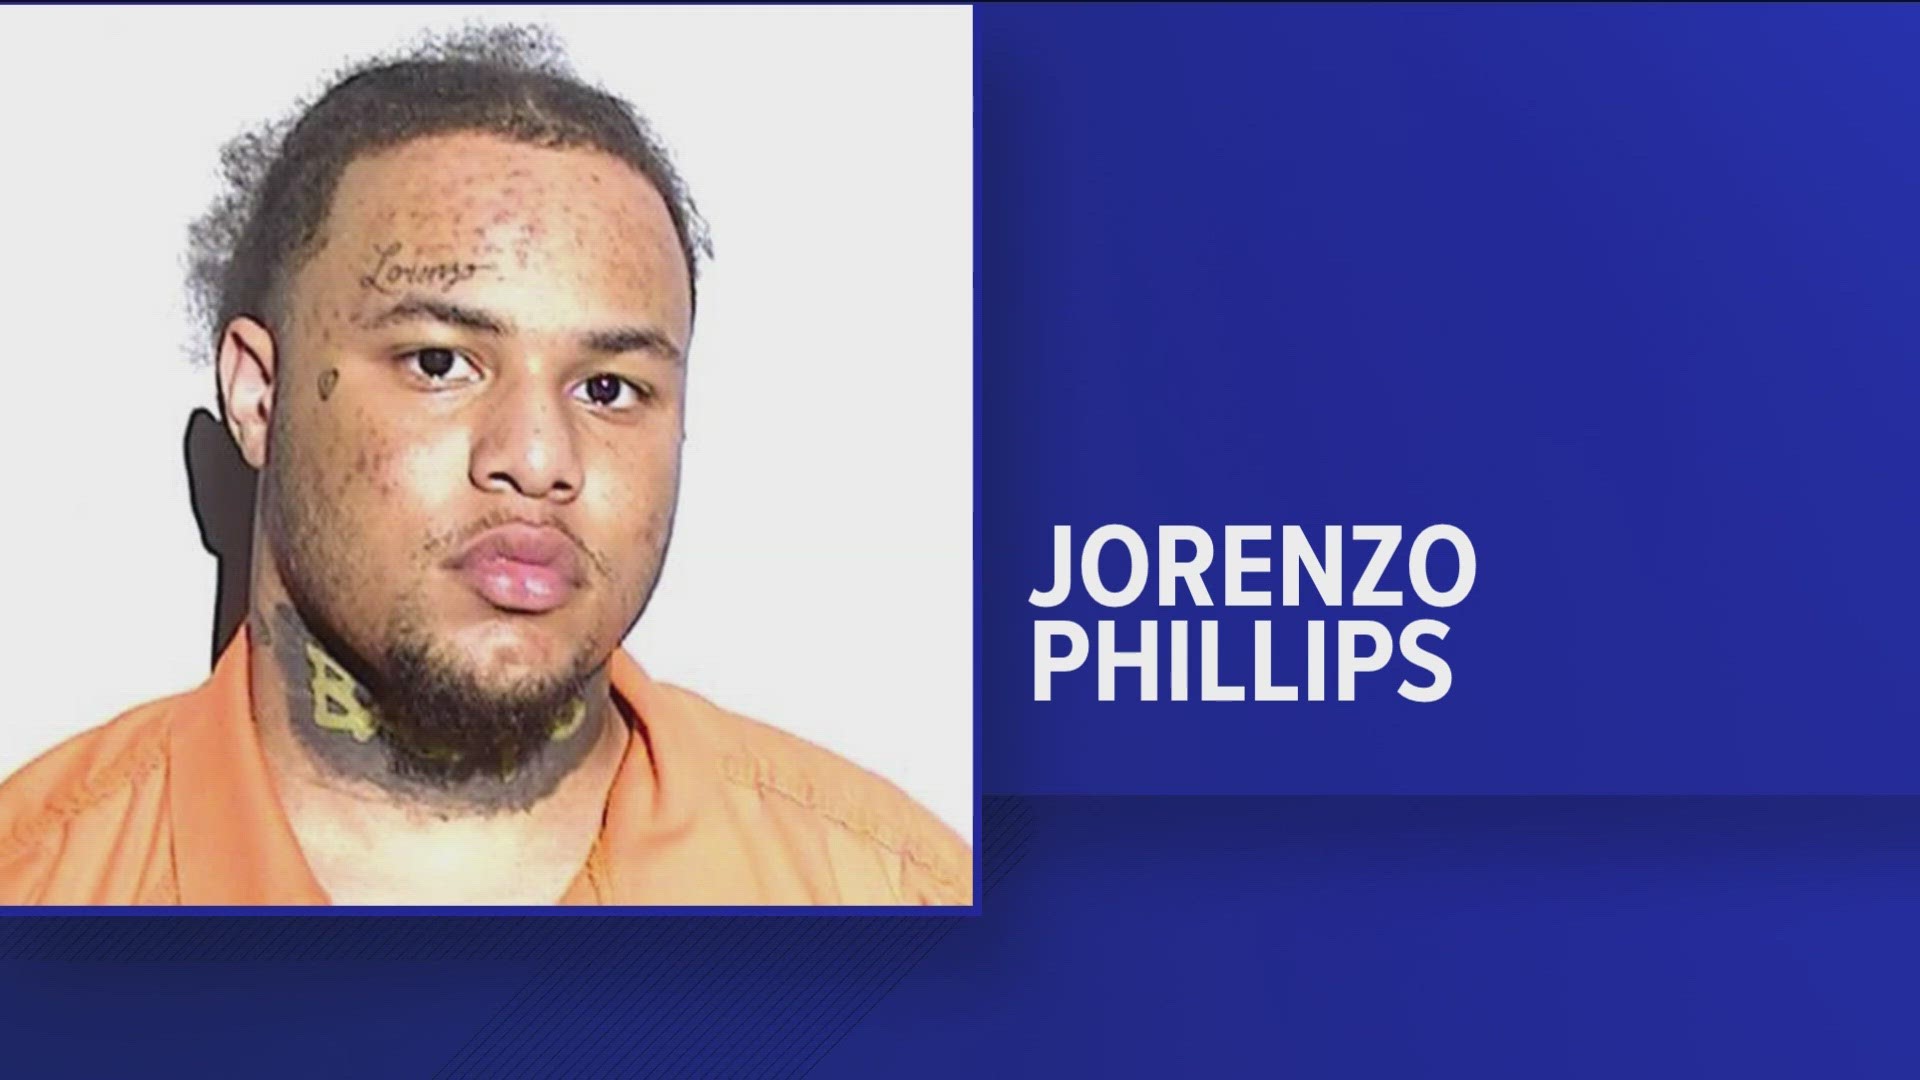 Jorenzo Phillips, whom police identified as the suspect in a double homicide earlier this month, was found dead.